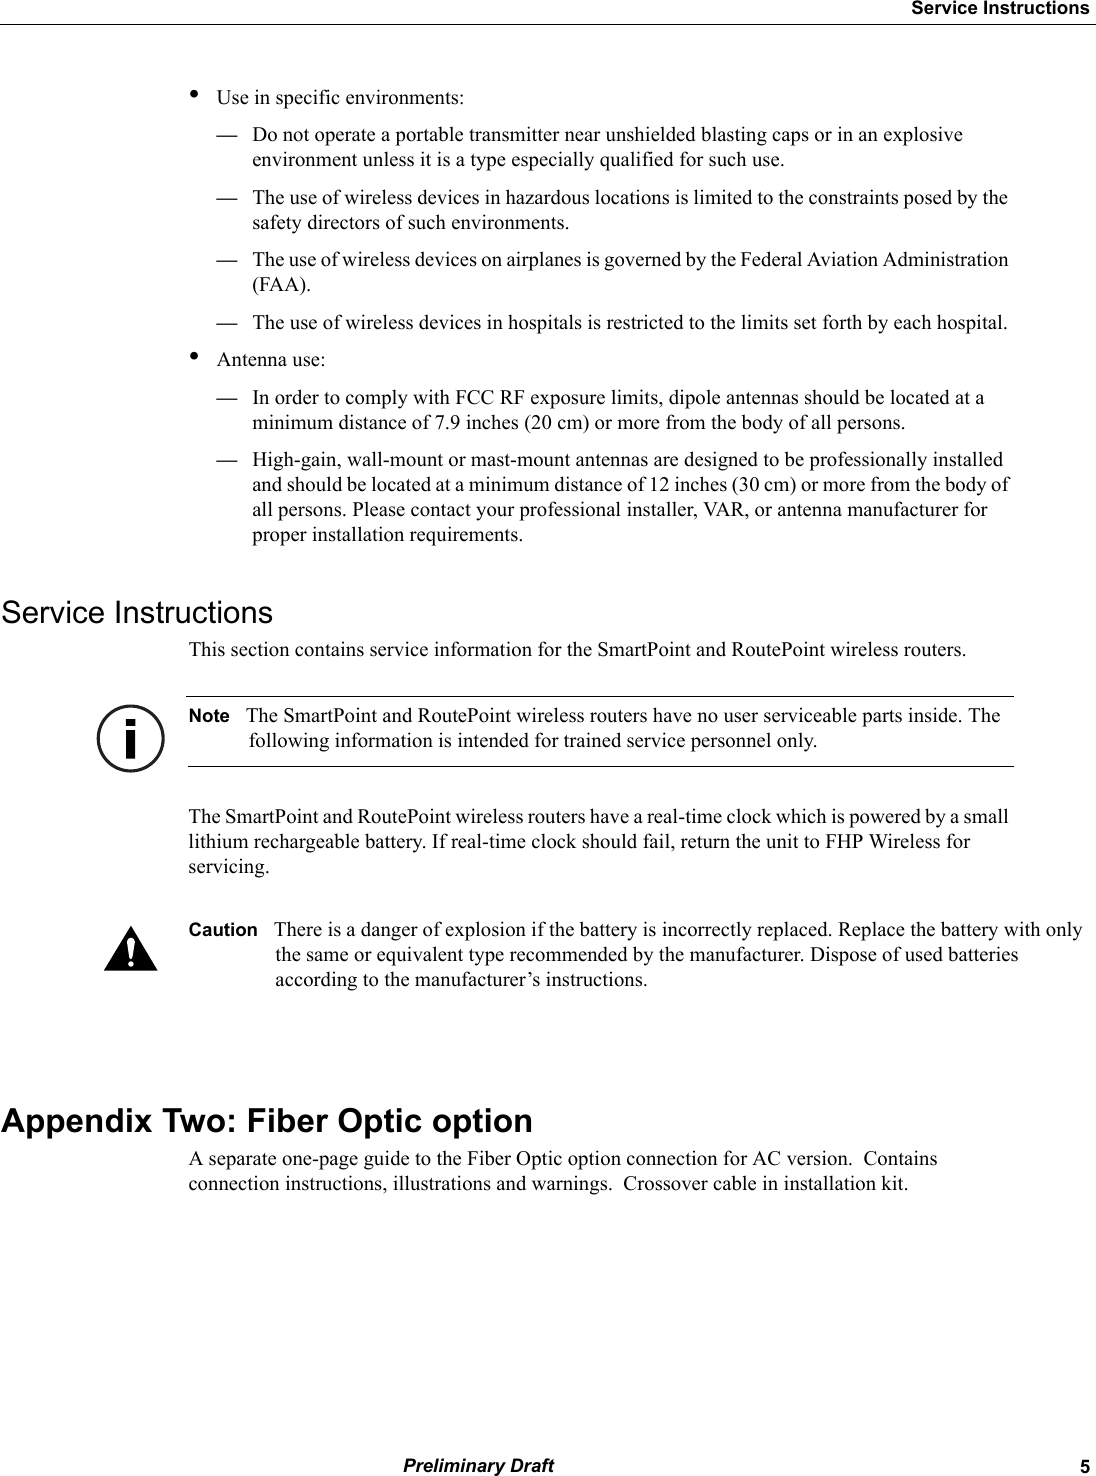   5Service Instructions Preliminary Draft•Use in specific environments:—Do not operate a portable transmitter near unshielded blasting caps or in an explosive environment unless it is a type especially qualified for such use.—The use of wireless devices in hazardous locations is limited to the constraints posed by the safety directors of such environments.—The use of wireless devices on airplanes is governed by the Federal Aviation Administration (FAA).—The use of wireless devices in hospitals is restricted to the limits set forth by each hospital.•Antenna use:—In order to comply with FCC RF exposure limits, dipole antennas should be located at a minimum distance of 7.9 inches (20 cm) or more from the body of all persons.—High-gain, wall-mount or mast-mount antennas are designed to be professionally installed and should be located at a minimum distance of 12 inches (30 cm) or more from the body of all persons. Please contact your professional installer, VAR, or antenna manufacturer for proper installation requirements.Service InstructionsThis section contains service information for the SmartPoint and RoutePoint wireless routers.Note The SmartPoint and RoutePoint wireless routers have no user serviceable parts inside. The following information is intended for trained service personnel only.The SmartPoint and RoutePoint wireless routers have a real-time clock which is powered by a small lithium rechargeable battery. If real-time clock should fail, return the unit to FHP Wireless for servicing.Caution There is a danger of explosion if the battery is incorrectly replaced. Replace the battery with only the same or equivalent type recommended by the manufacturer. Dispose of used batteries according to the manufacturer’s instructions.Appendix Two: Fiber Optic option A separate one-page guide to the Fiber Optic option connection for AC version.  Contains connection instructions, illustrations and warnings.  Crossover cable in installation kit.